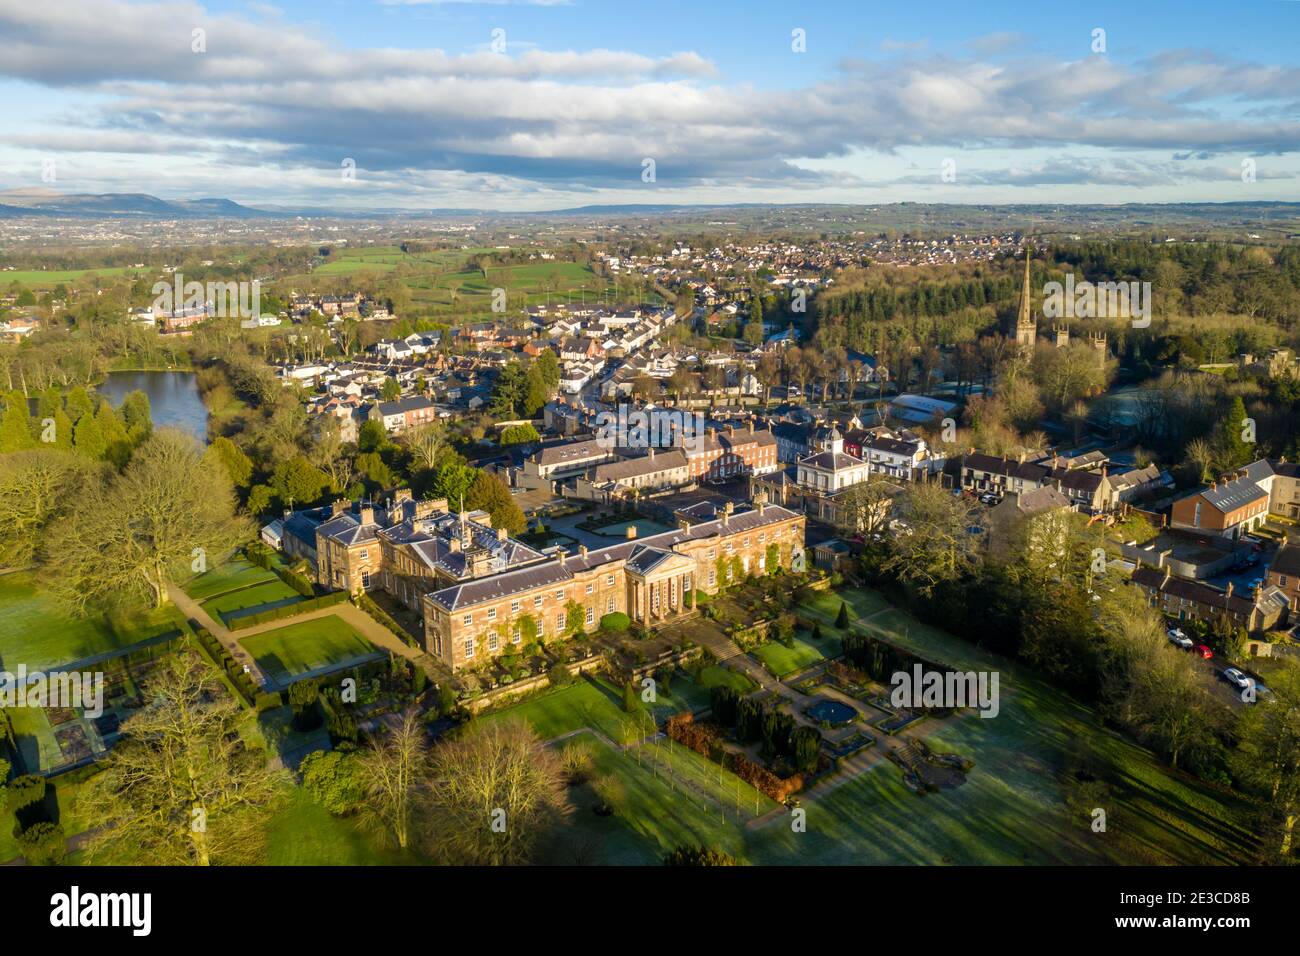 The town of Hillsborough in Northern Ireland Stock Photo